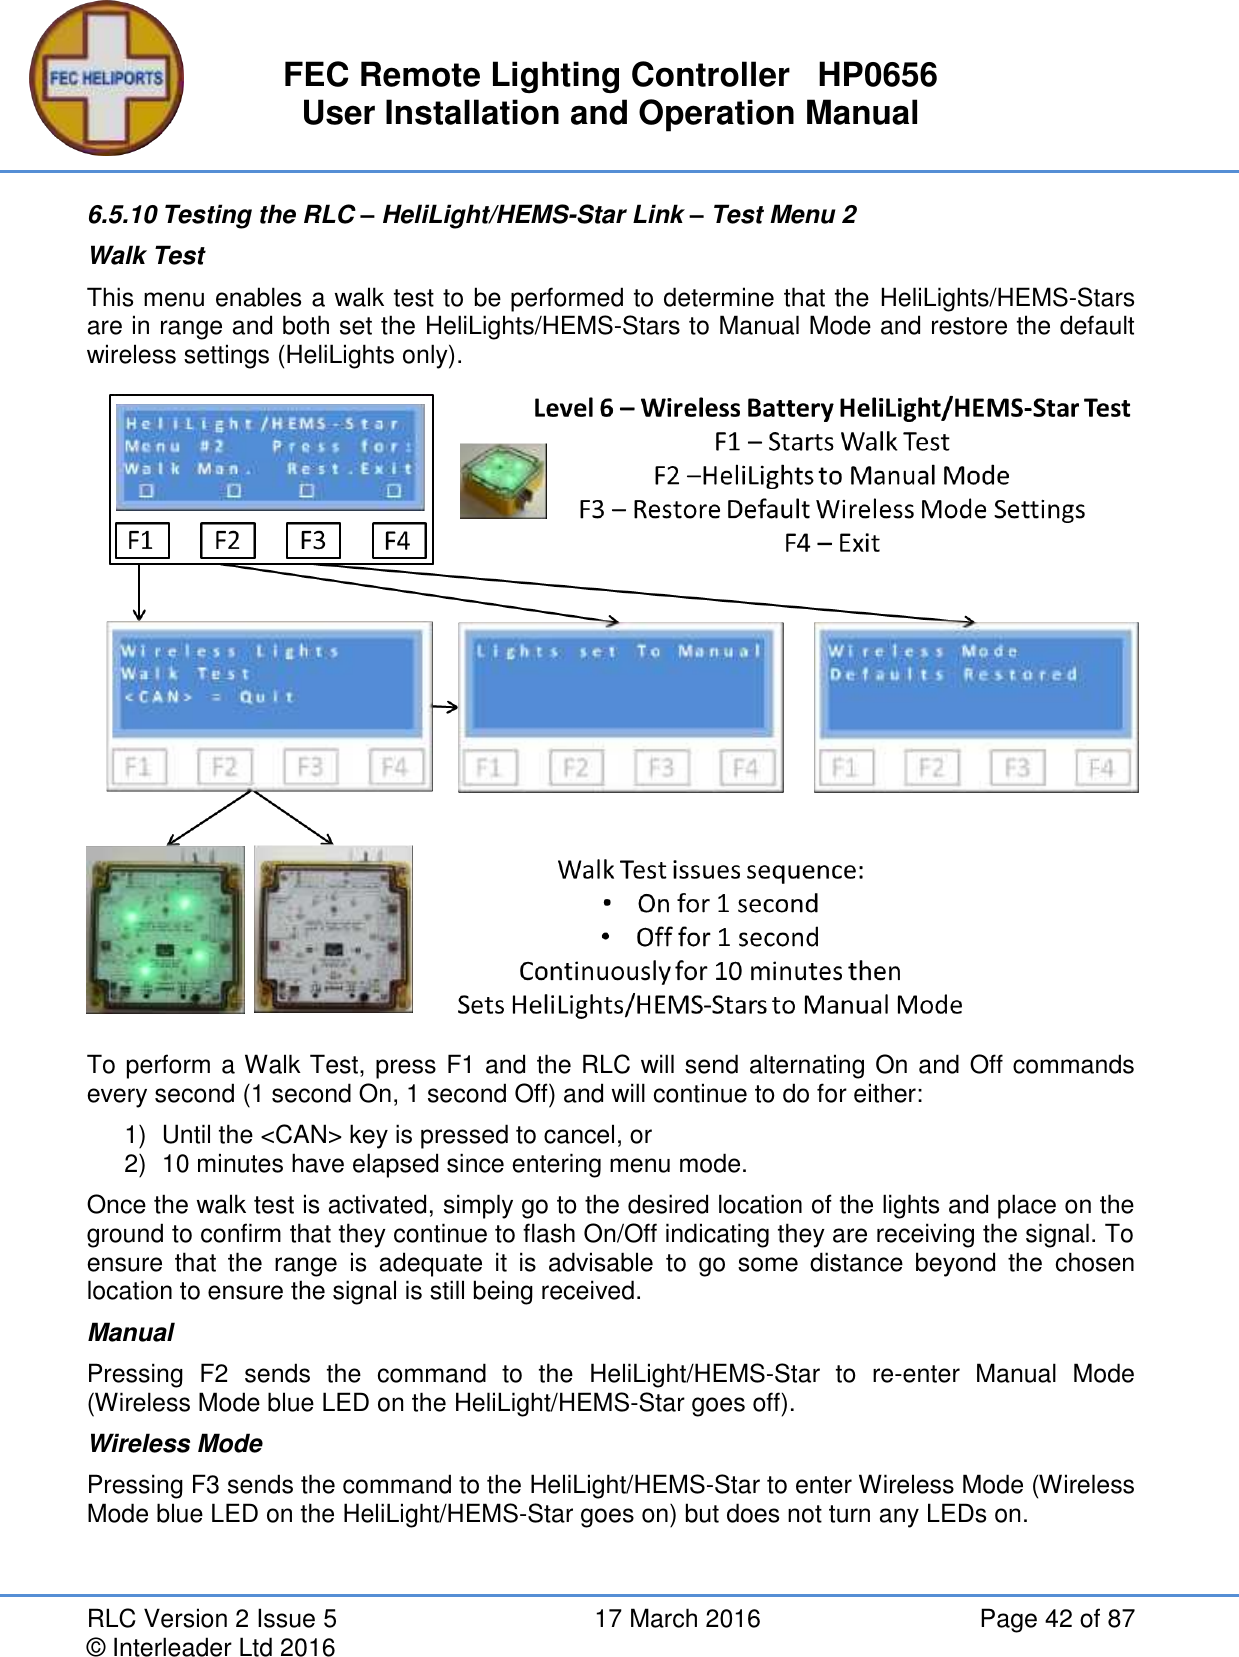 FEC Remote Lighting Controller   HP0656 User Installation and Operation Manual RLC Version 2 Issue 5  17 March 2016  Page 42 of 87 © Interleader Ltd 2016 6.5.10 Testing the RLC – HeliLight/HEMS-Star Link – Test Menu 2 Walk Test This menu enables a walk test to be performed to determine that the HeliLights/HEMS-Stars are in range and both set the HeliLights/HEMS-Stars to Manual Mode and restore the default wireless settings (HeliLights only).  To perform a Walk Test, press F1 and the RLC will send alternating On and Off commands every second (1 second On, 1 second Off) and will continue to do for either: 1)  Until the &lt;CAN&gt; key is pressed to cancel, or 2)  10 minutes have elapsed since entering menu mode. Once the walk test is activated, simply go to the desired location of the lights and place on the ground to confirm that they continue to flash On/Off indicating they are receiving the signal. To ensure  that  the  range  is  adequate  it  is  advisable  to  go  some  distance  beyond  the  chosen location to ensure the signal is still being received. Manual Pressing  F2  sends  the  command  to  the  HeliLight/HEMS-Star  to  re-enter  Manual  Mode (Wireless Mode blue LED on the HeliLight/HEMS-Star goes off). Wireless Mode Pressing F3 sends the command to the HeliLight/HEMS-Star to enter Wireless Mode (Wireless Mode blue LED on the HeliLight/HEMS-Star goes on) but does not turn any LEDs on.    